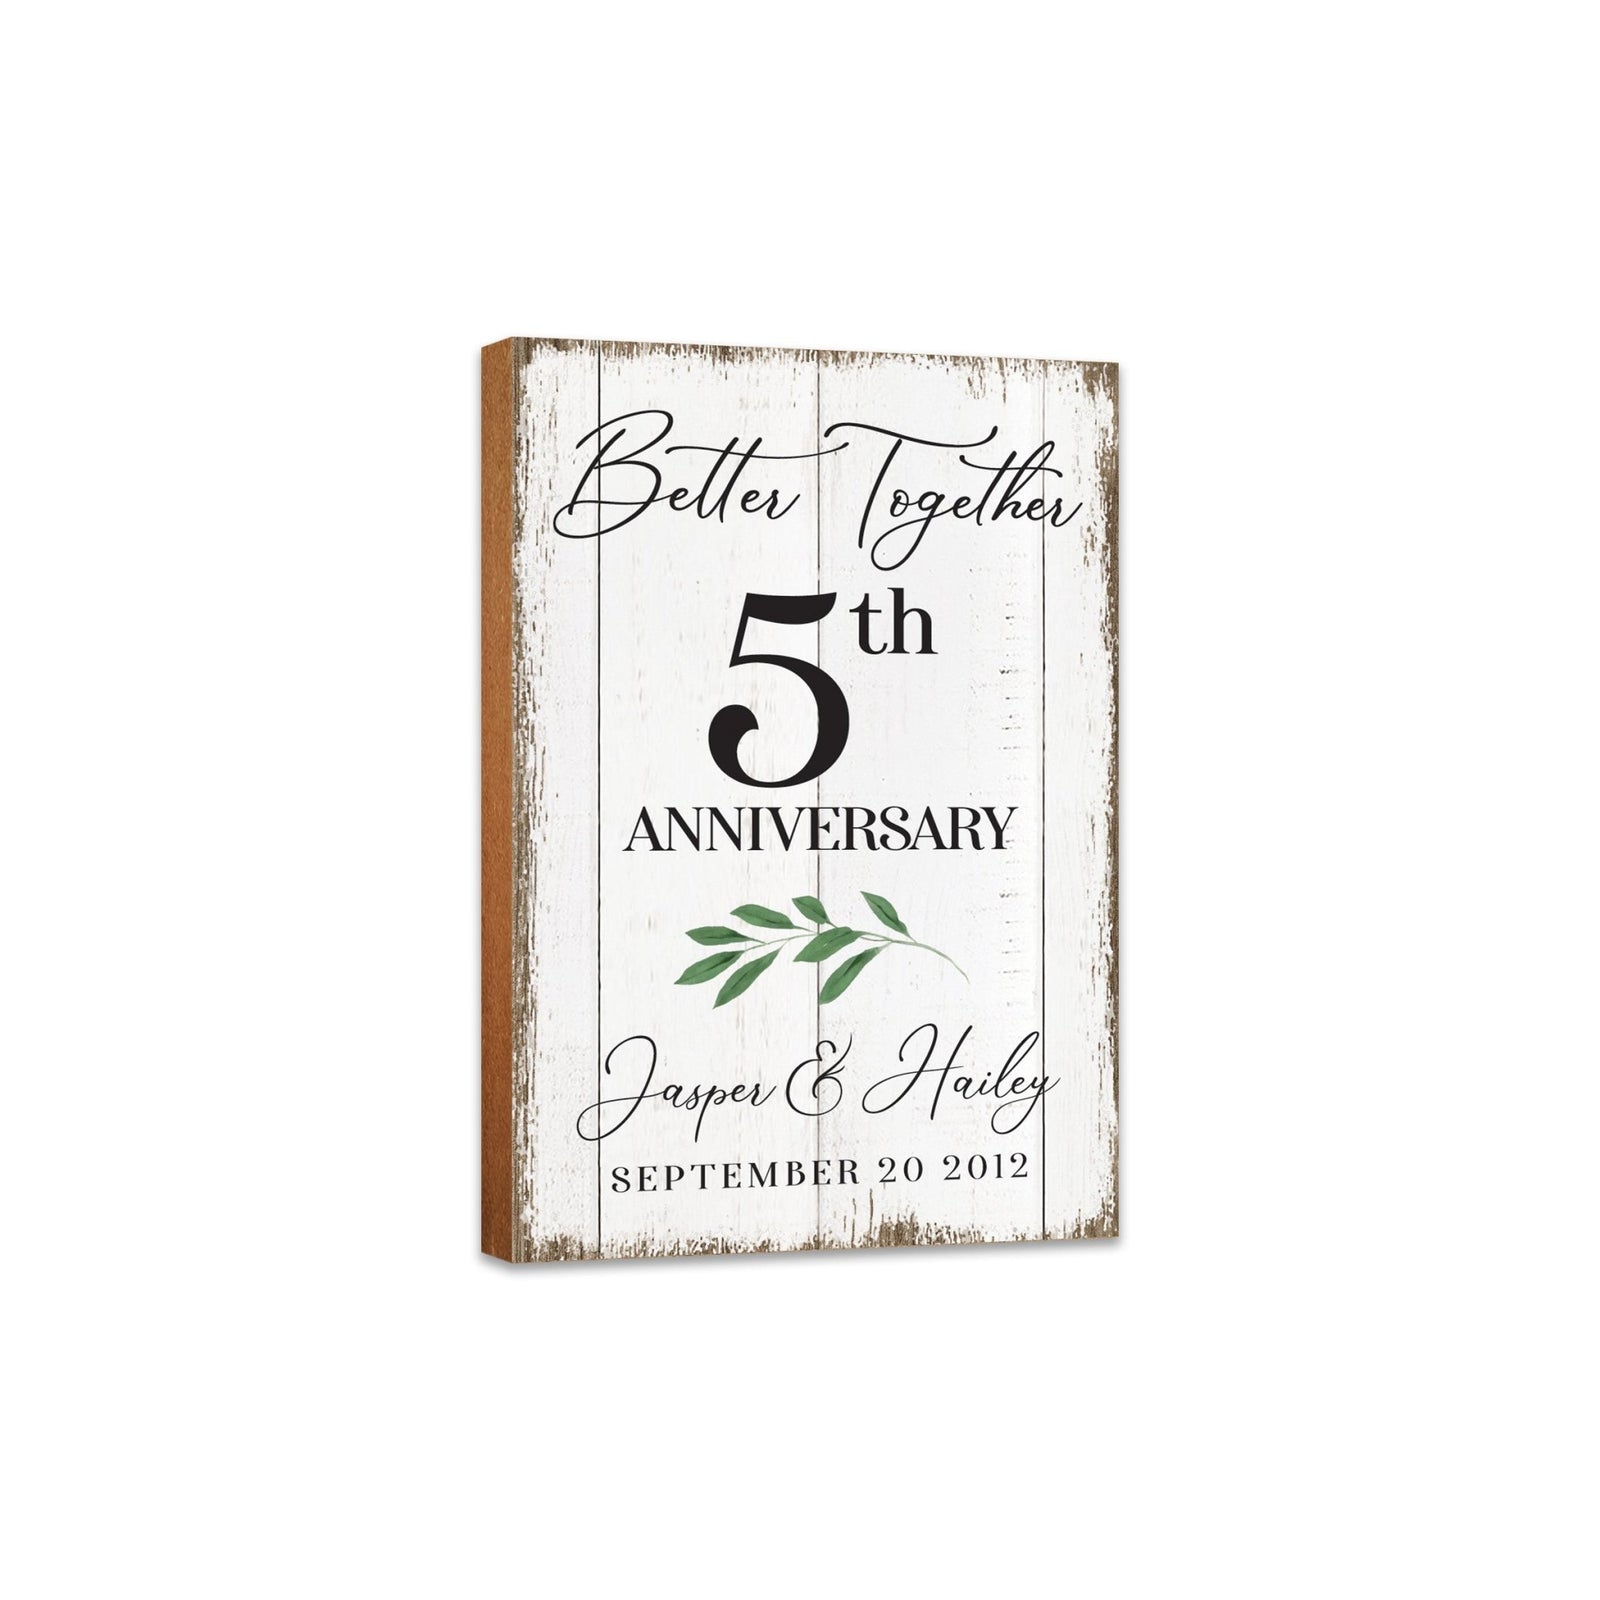 Custom Wooden Shelf Décor and Tabletop Signs for Wedding Anniversary - Better Together - LifeSong Milestones